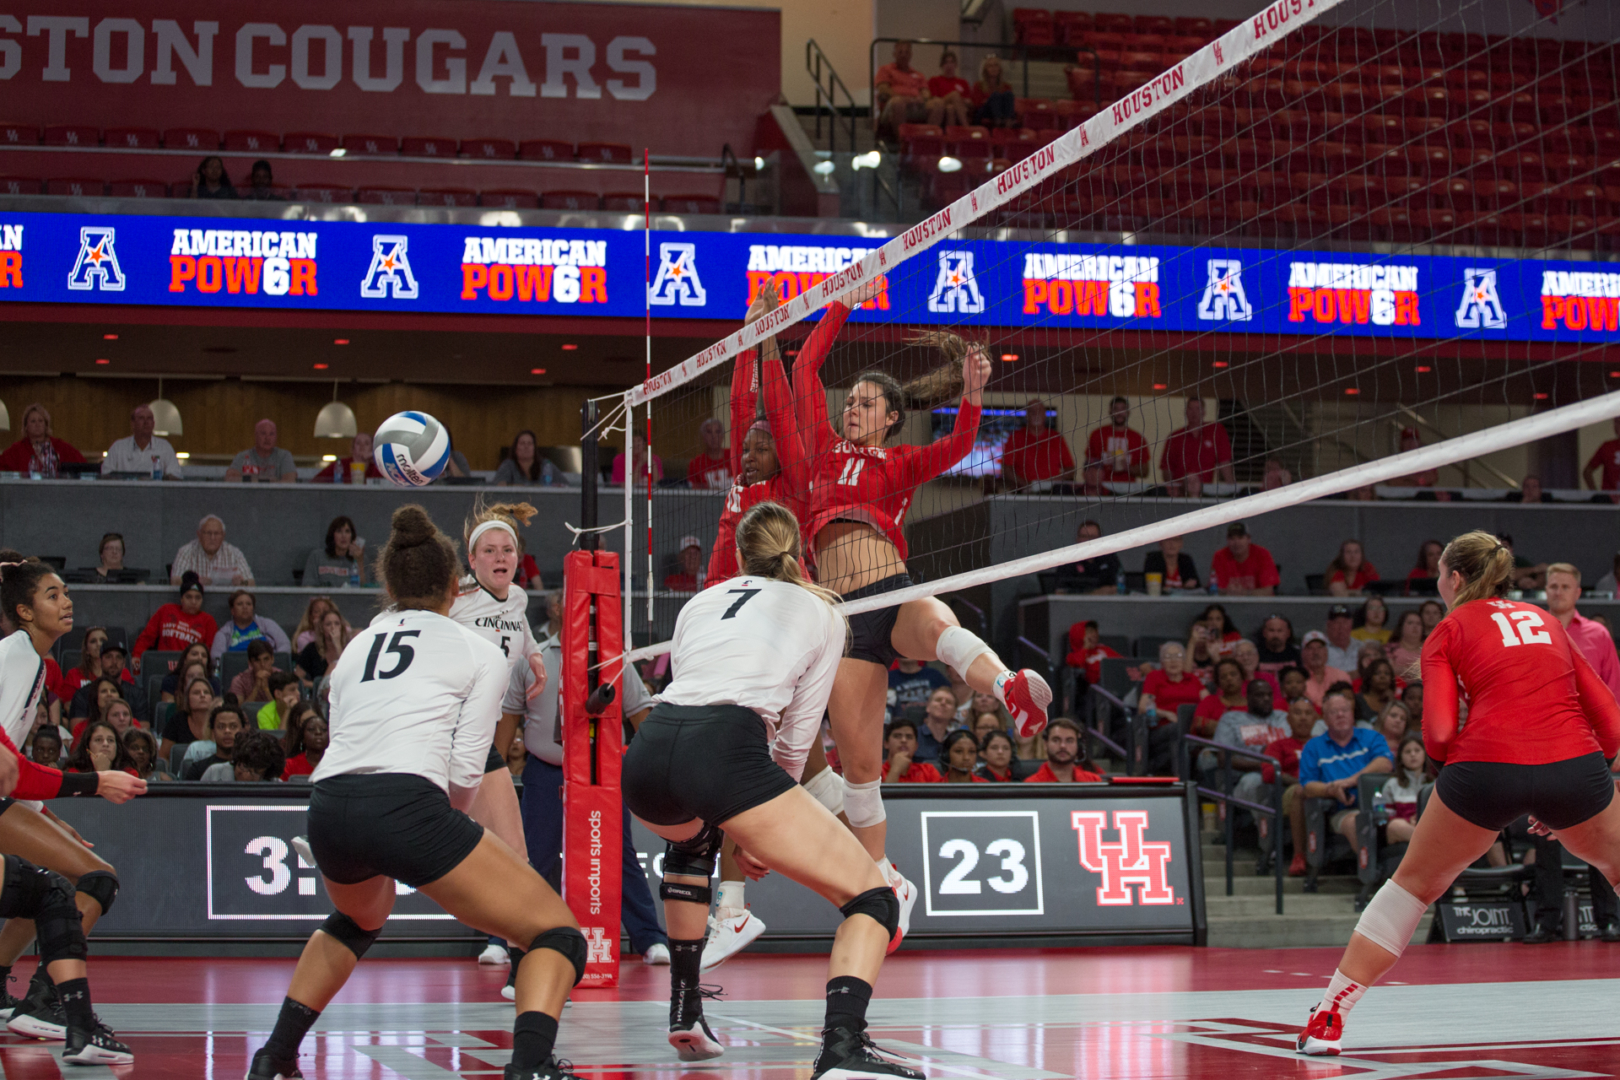 The Cougars suffered their first conference defeat in a 3-2 loss at home against Cincinnati. Houston will head to Florida on Friday to face UCF with a conference record of 7-1. | Trevor Nolley/The Cougar